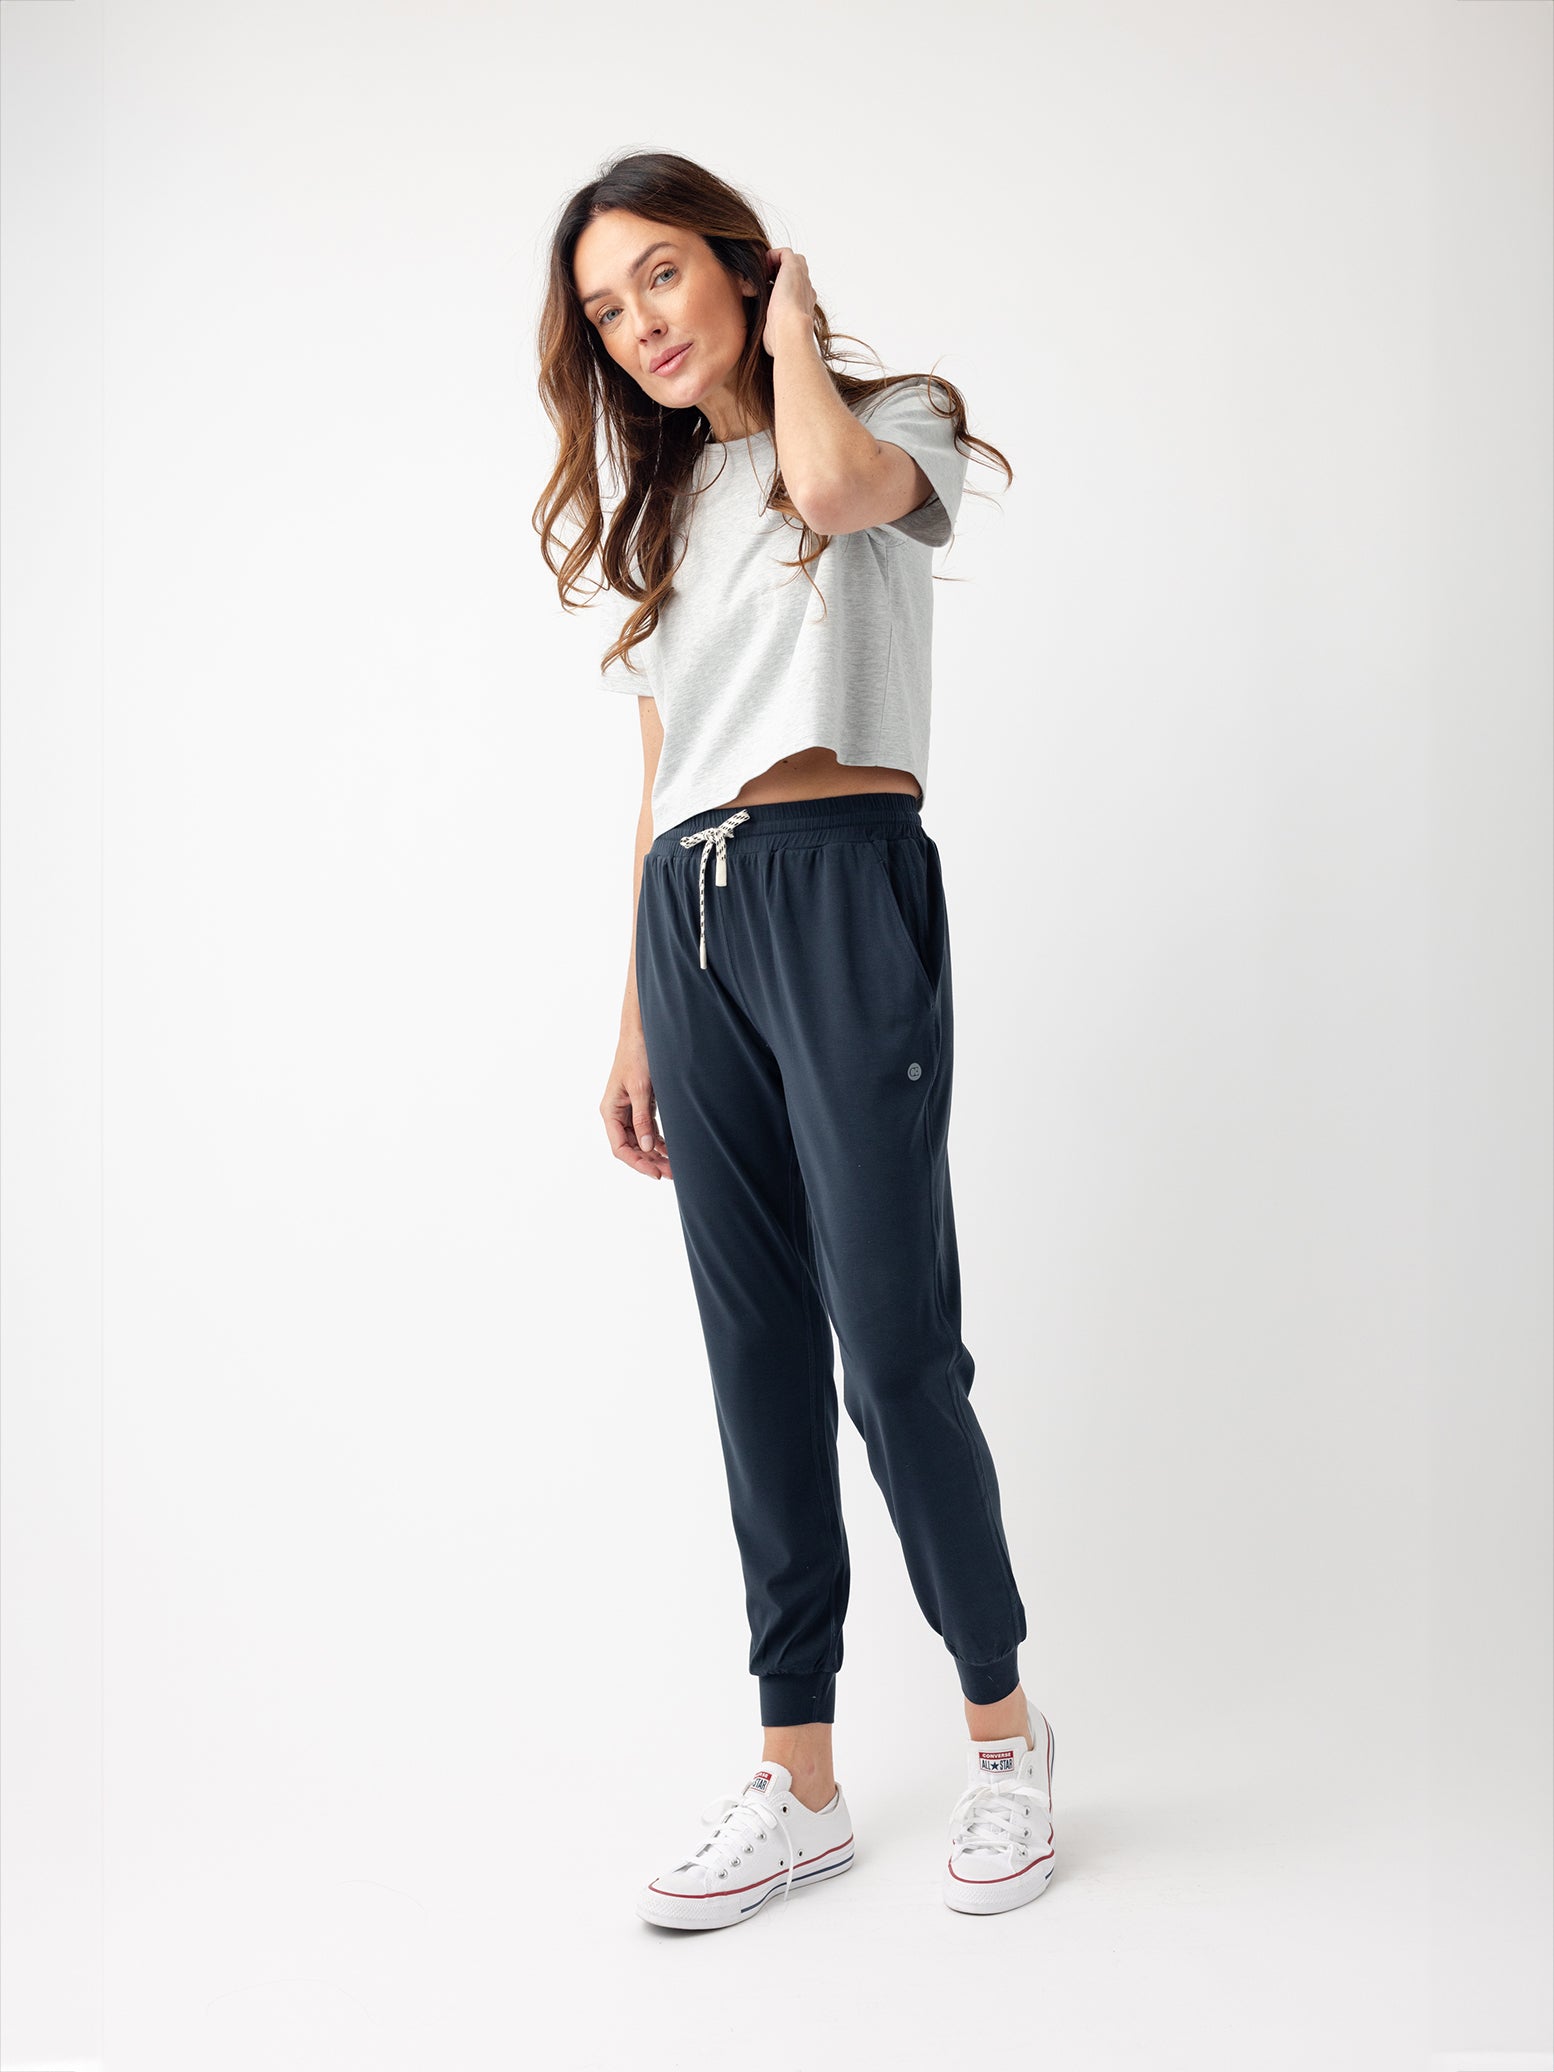 Eclipse Studio Jogger. The Studio Joggers are worn by a woman photographed with a white background. |Color:Eclipse